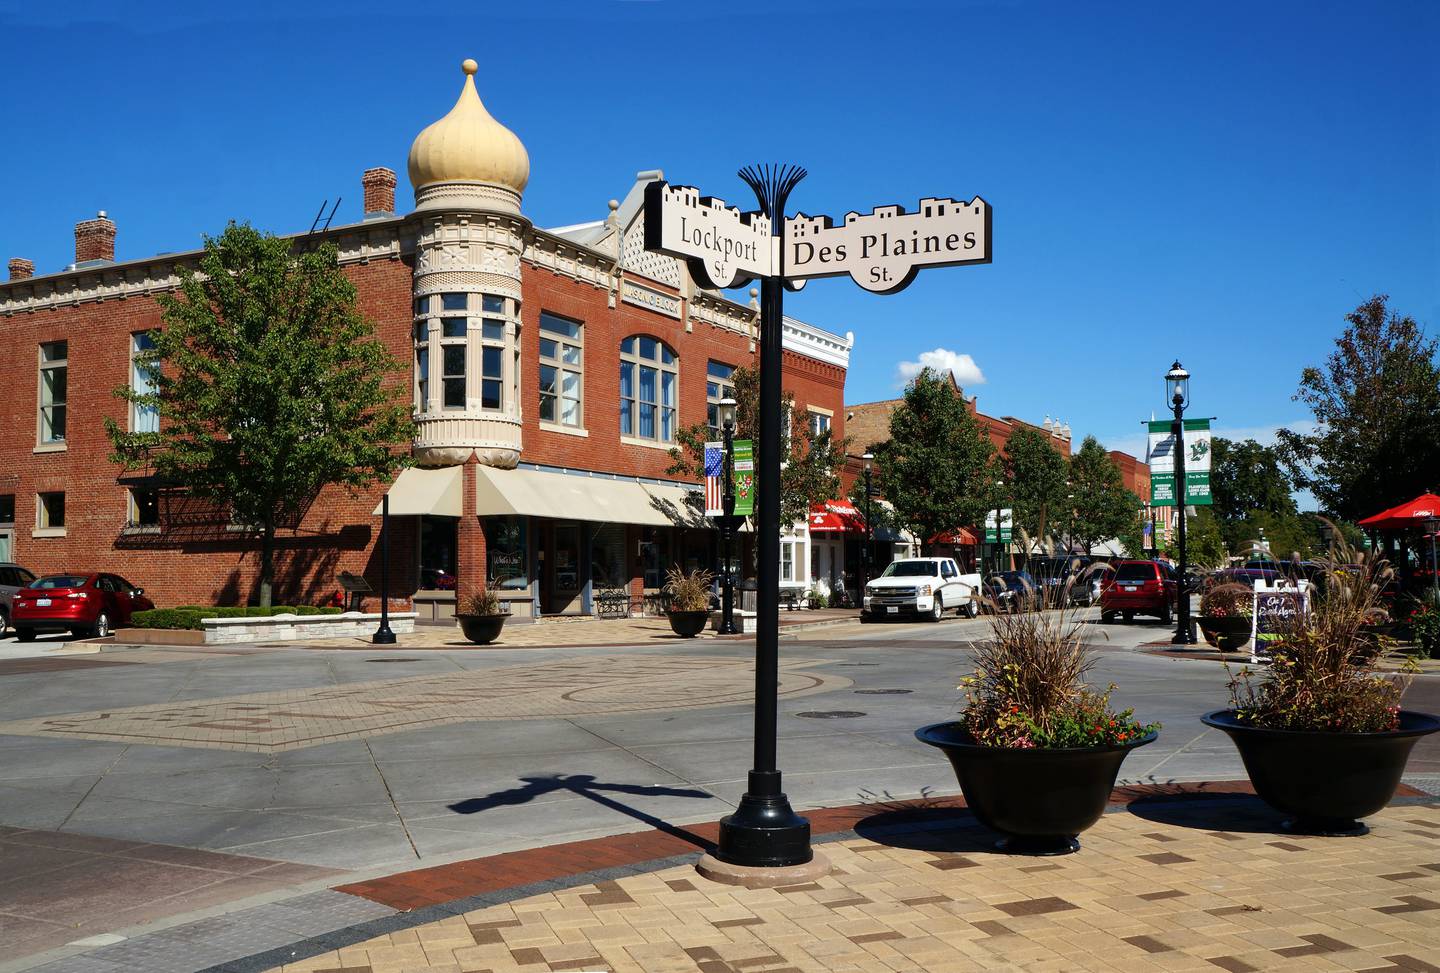 PLAINFIELD, ILLINOIS / UNITED STATES - SEPTEMBER 20, 2015: Street signs mark the corner of Lockport and Des Plaines Streets, in the heart of downtown Plainfield.